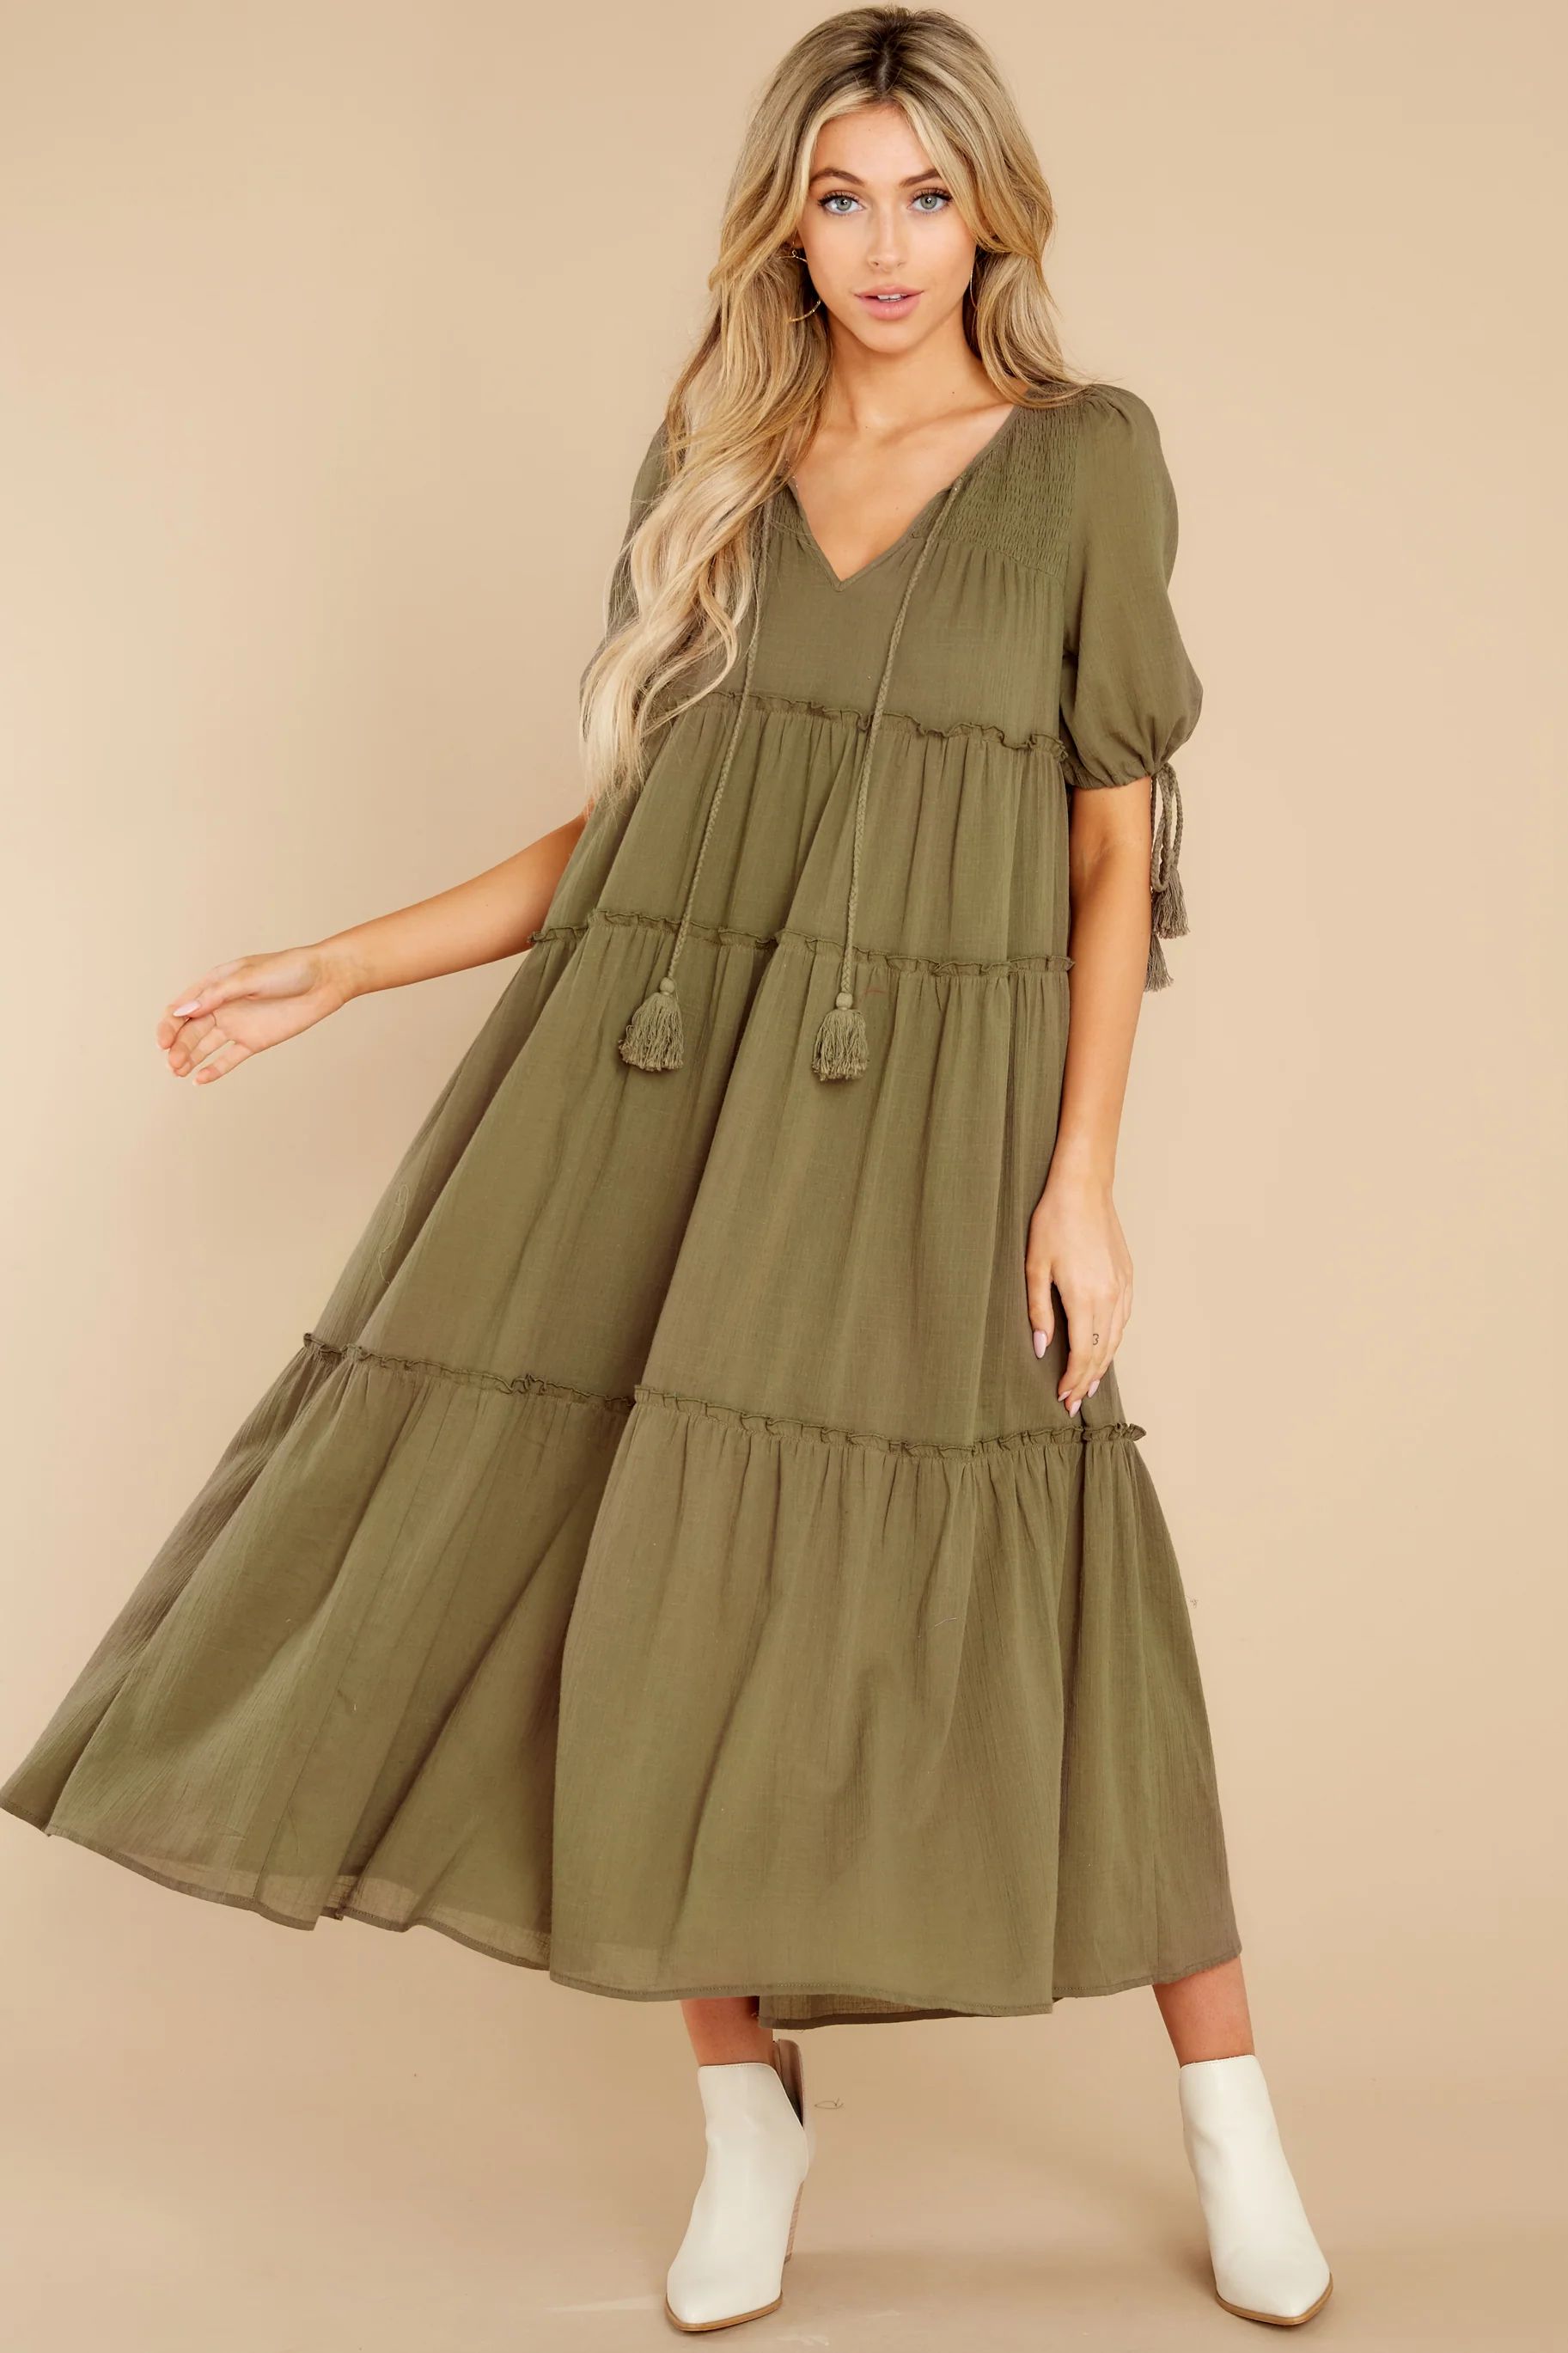 Isn't She Lively Olive Maxi Dress | Red Dress 